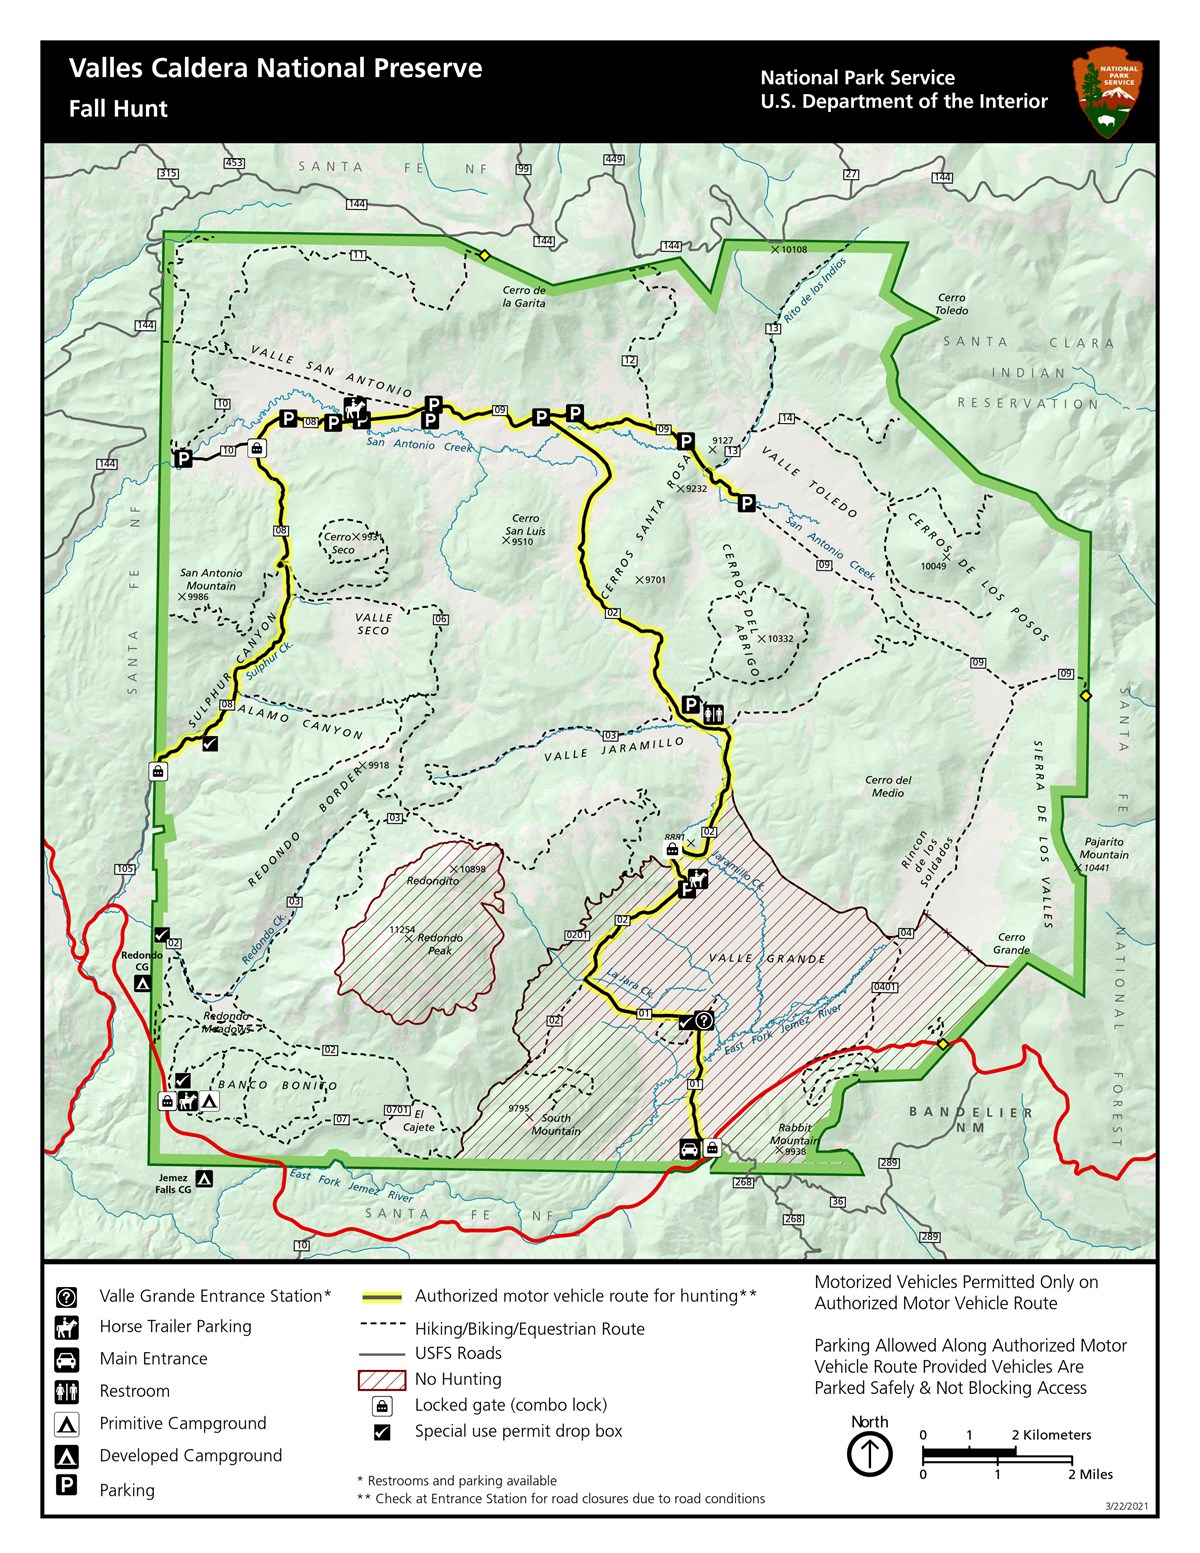 A hunting map titled Valles Caldera National Preserve Fall Hunt.  The color-coded map showing roads, facilities, trails, and hunting zones.  A key at the bottom with scale defines each feature with independent symbols.